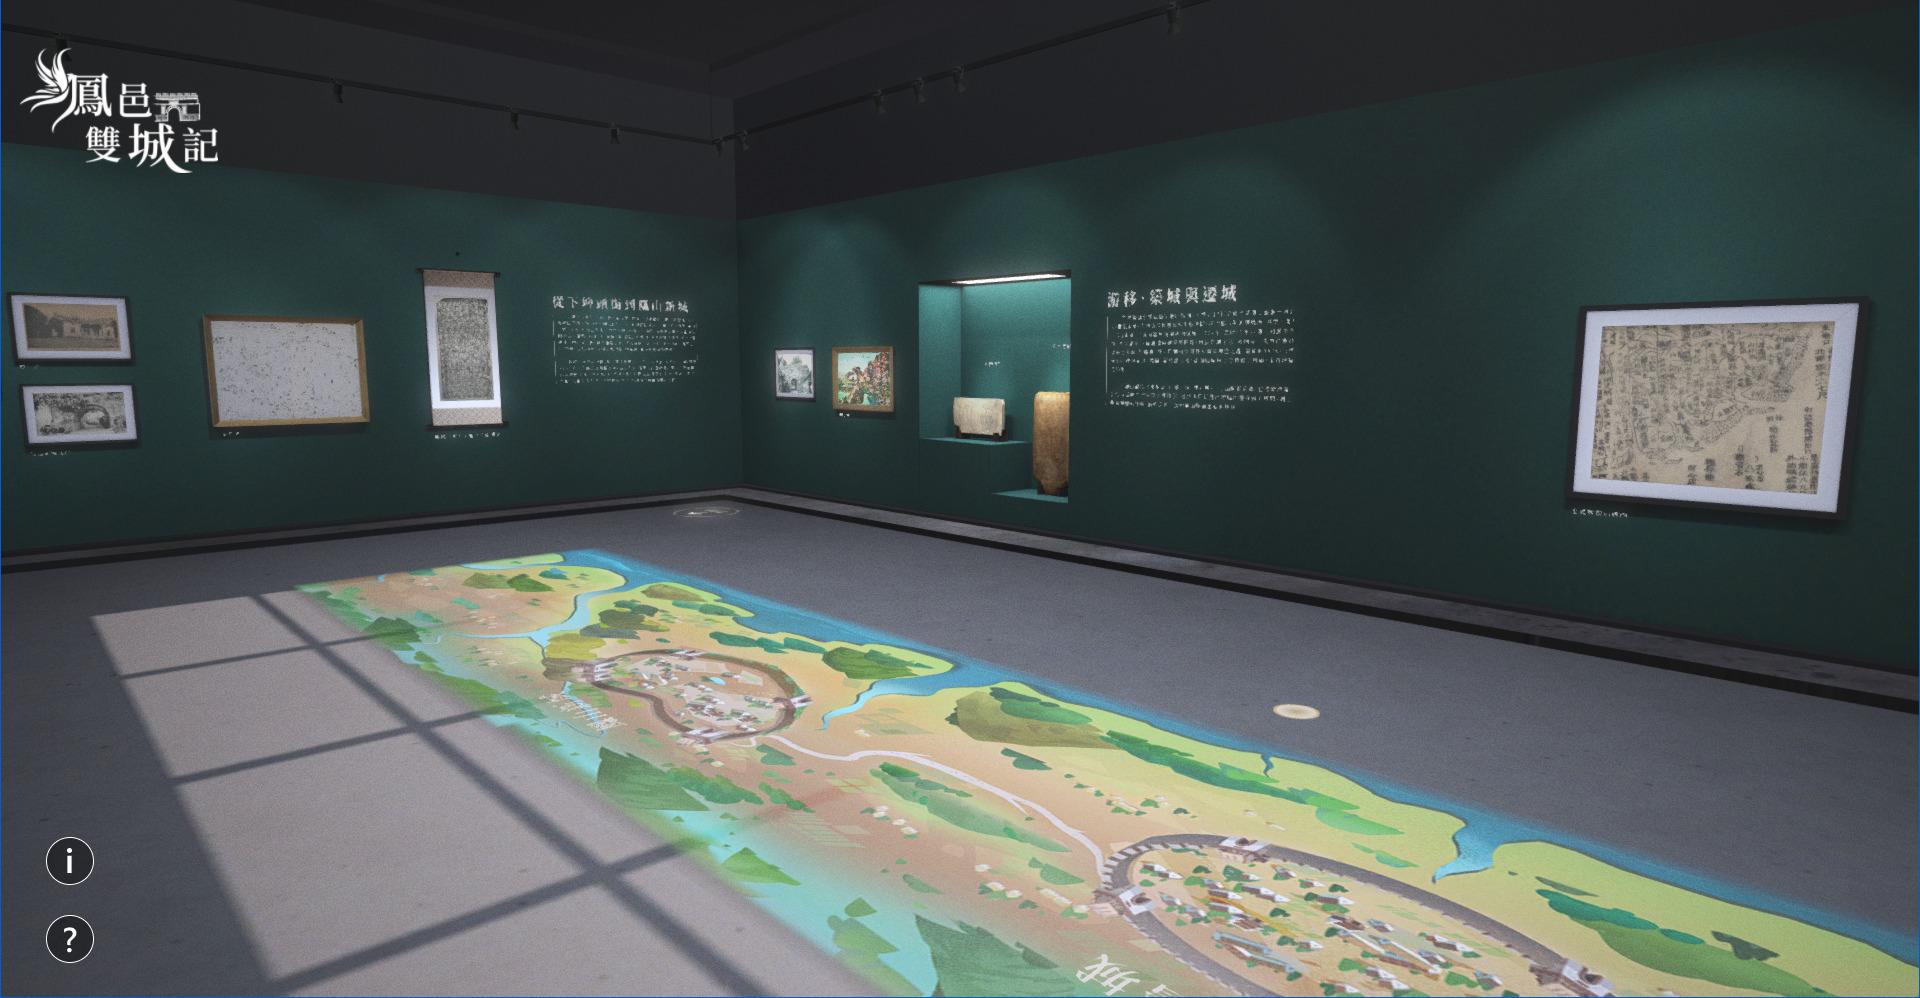 Online Exhibition, A Tale of Two Cities in Fengyi, Kaohsiung Museum of History, Wang Yi Design, KingOneDesign, KaohsiungMuseumofHistory